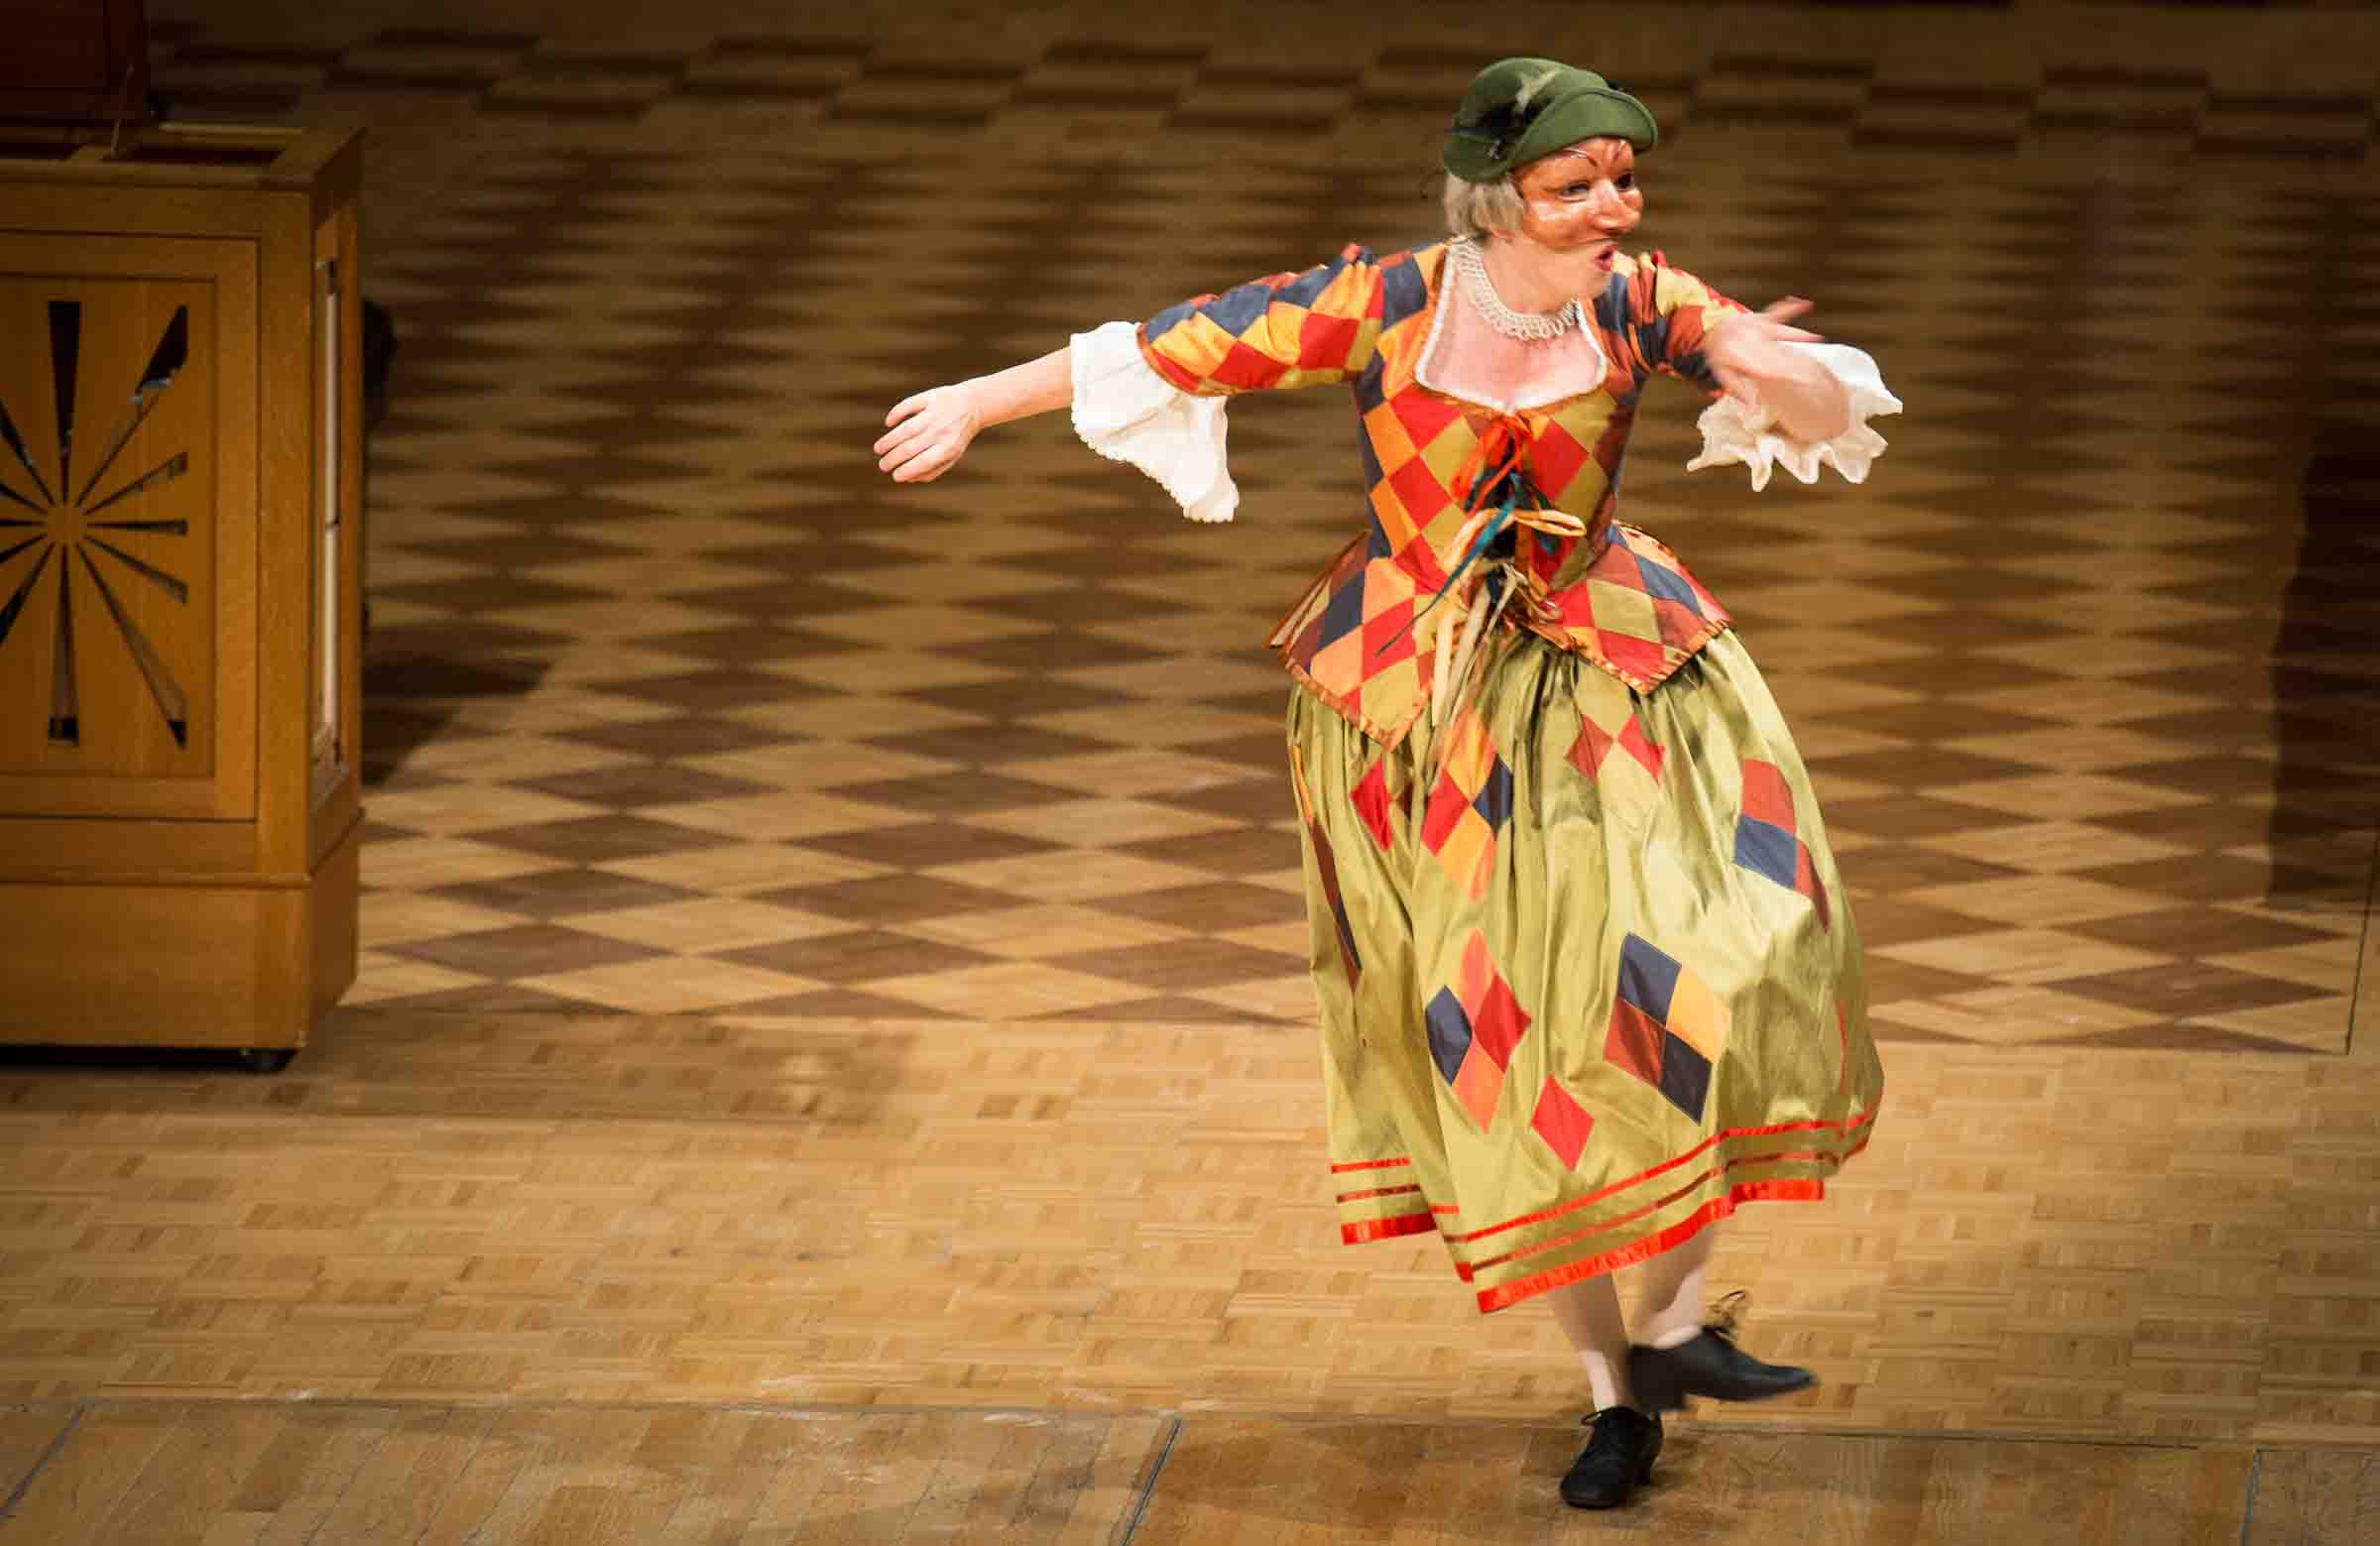 Marie-Nathalie Lacoursière as a harlequine in Anna Magdalena Songbook – Home Suite Home. Photo © Jan Gates.